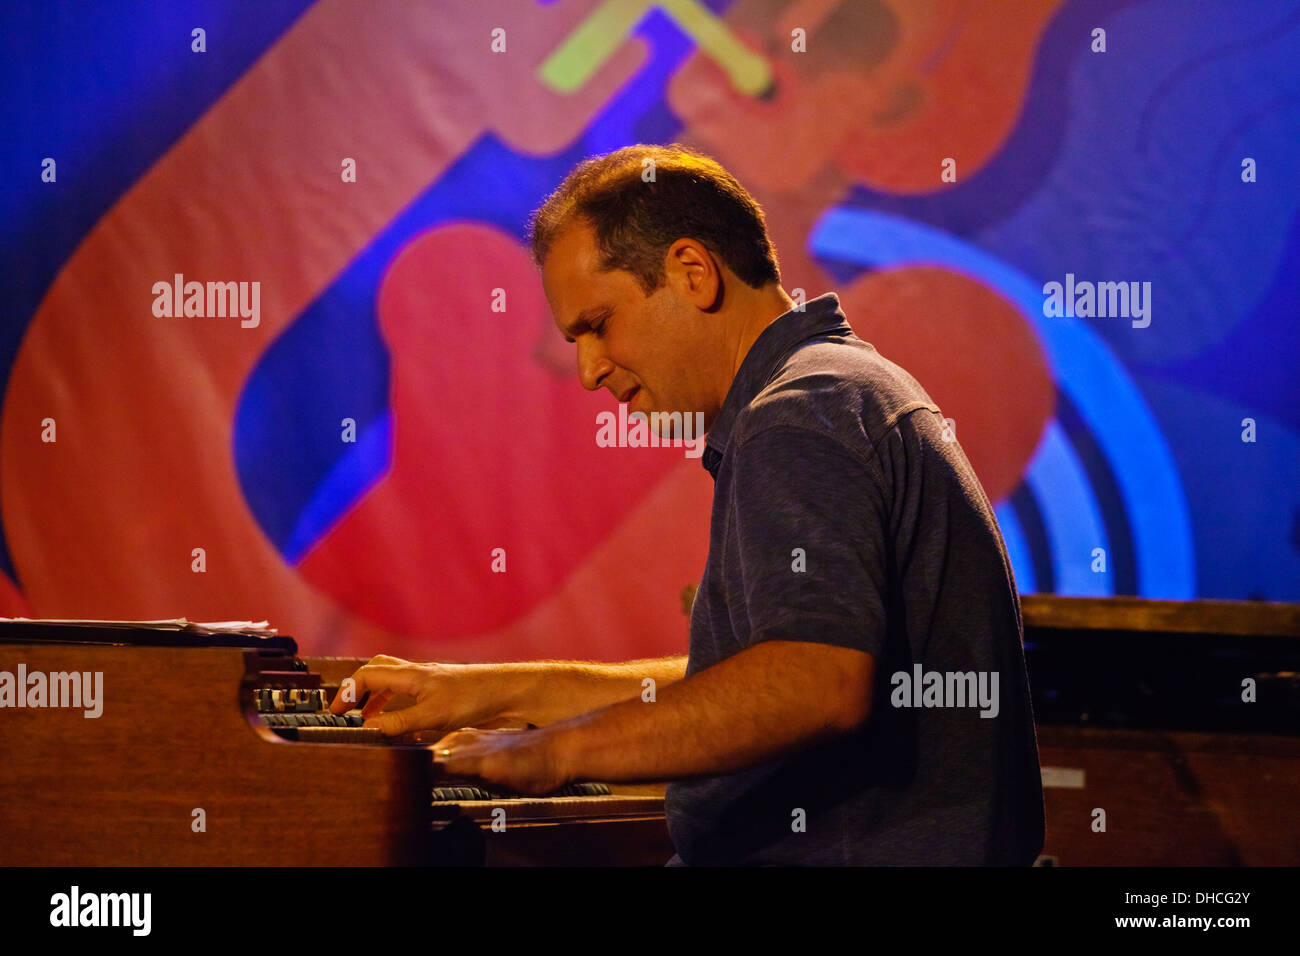 LARRY GOLDINGS plays the Hamond B3 organ with the ANTHONY WILSON TRIO at the Monterey Jazz Festival - MONTEREY, CALIFORNIA Stock Photo